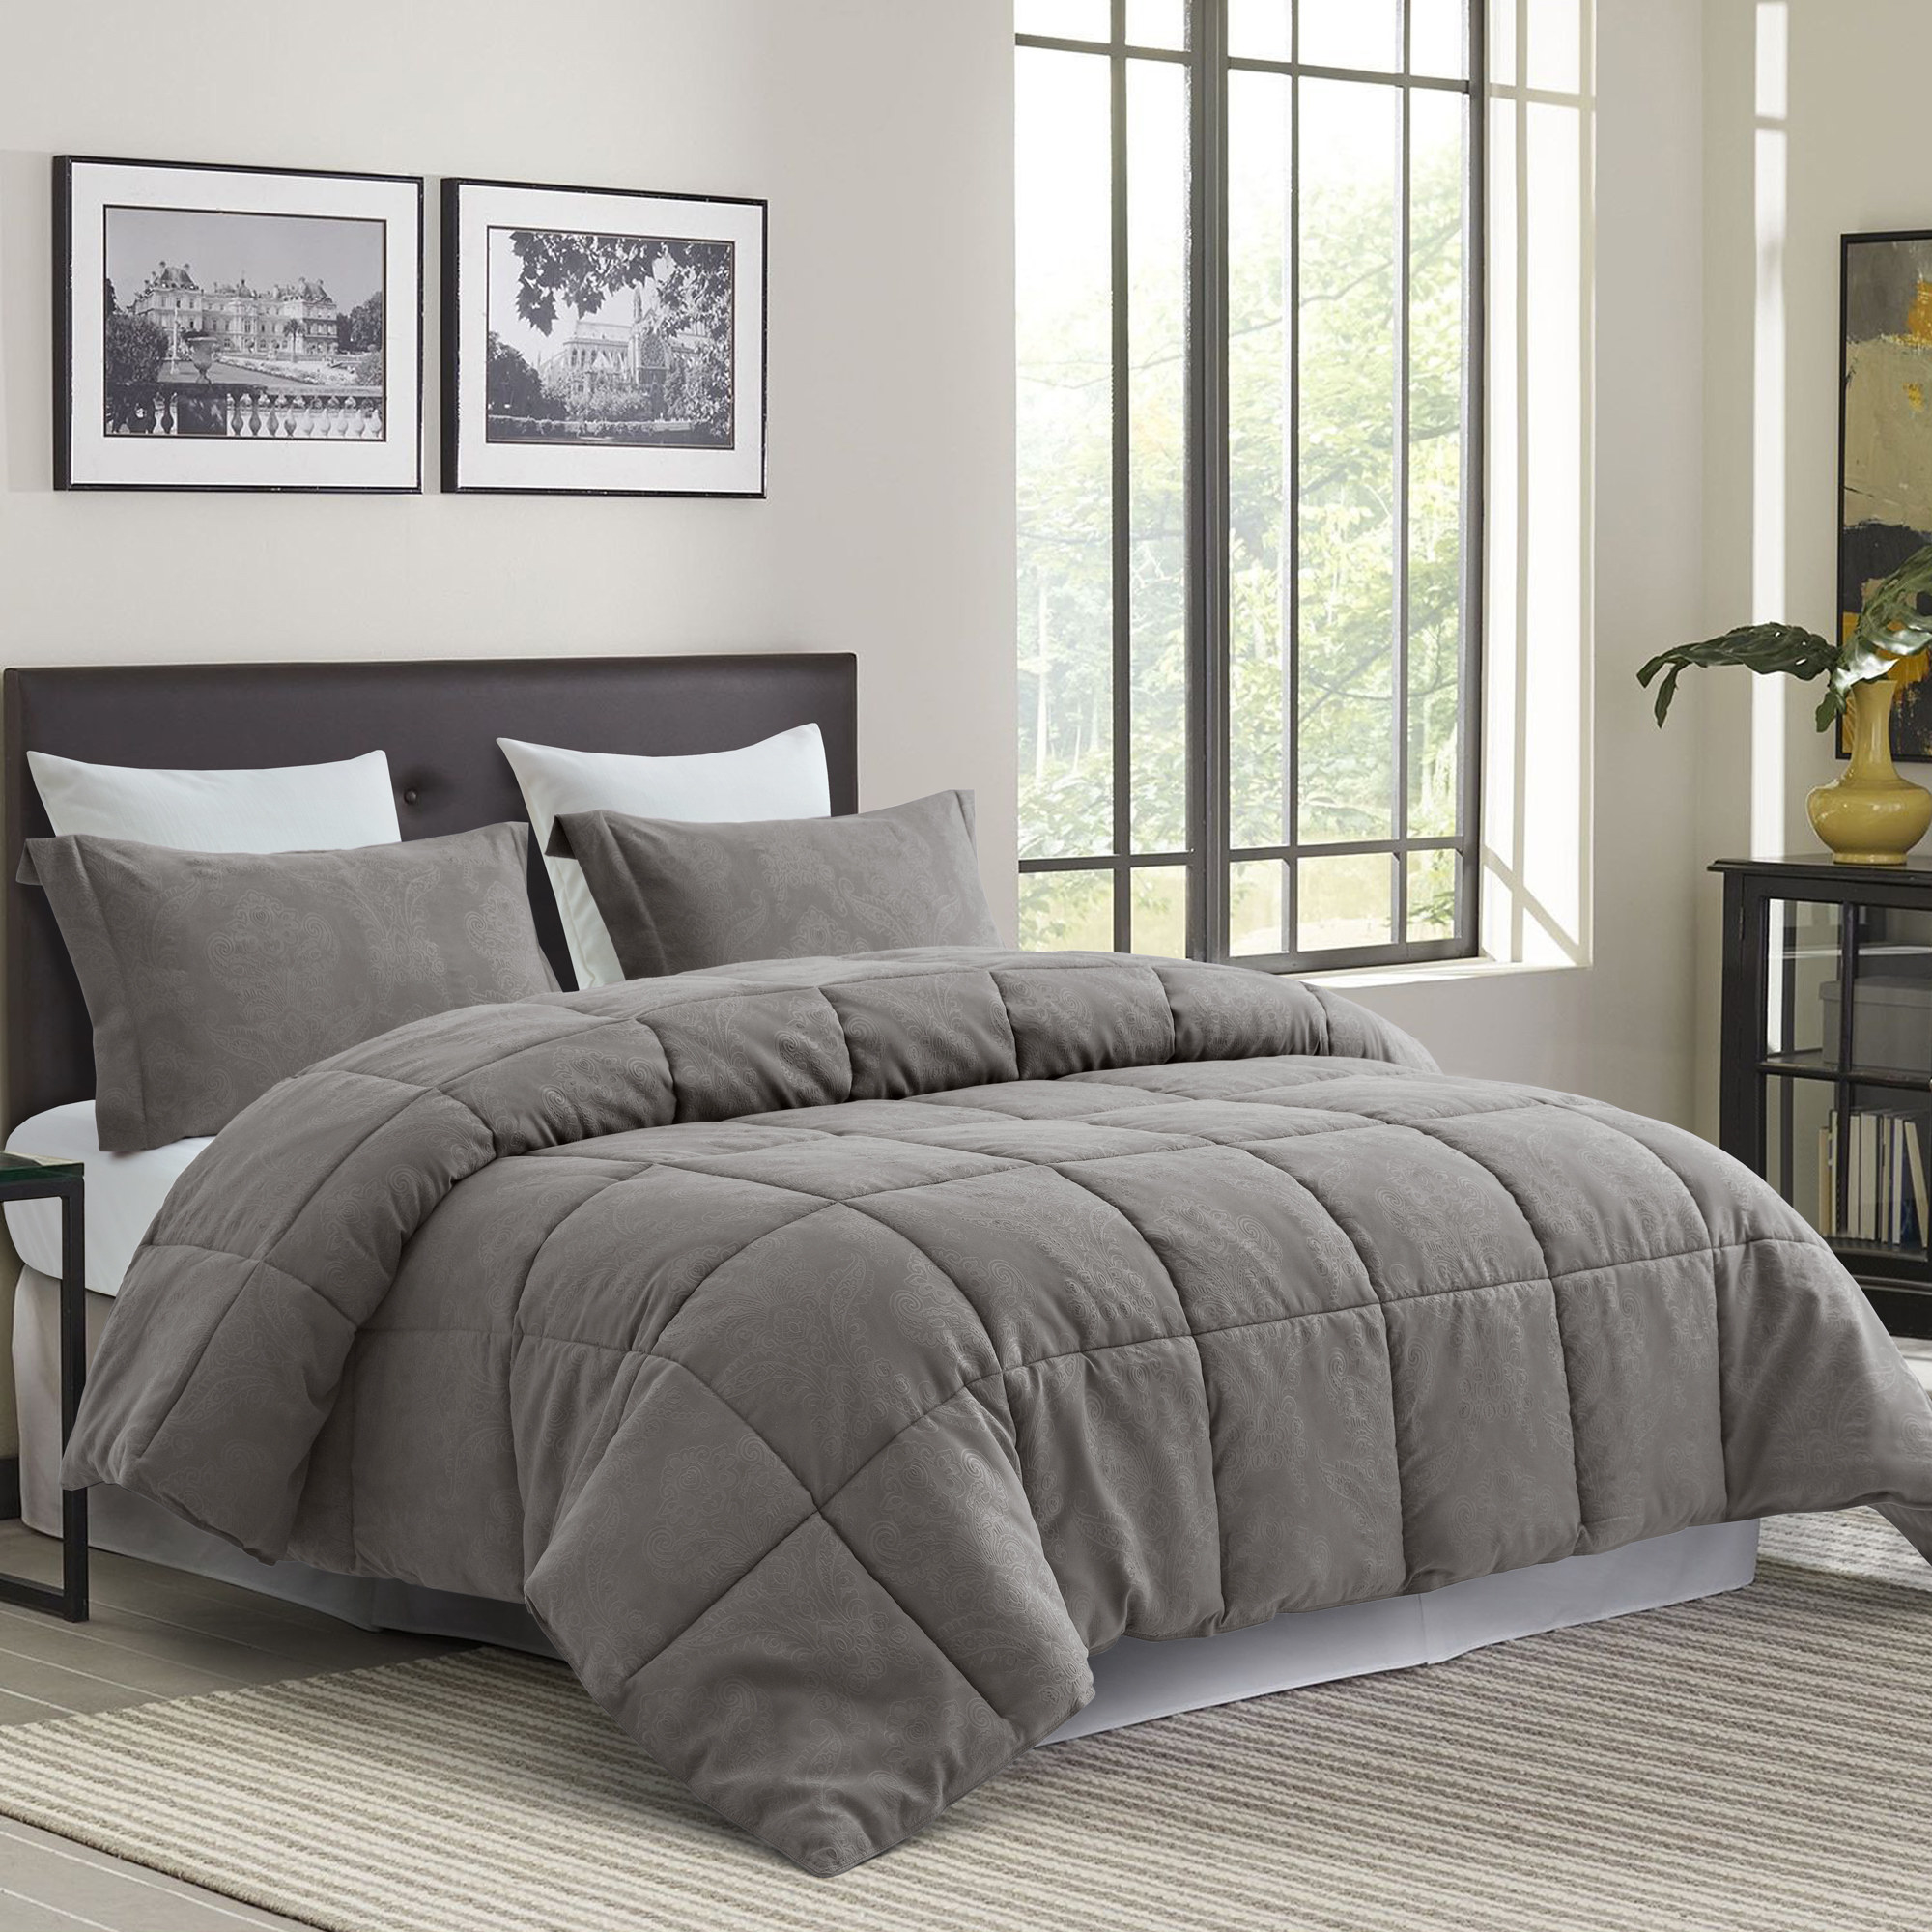 The grey comforter on a bed